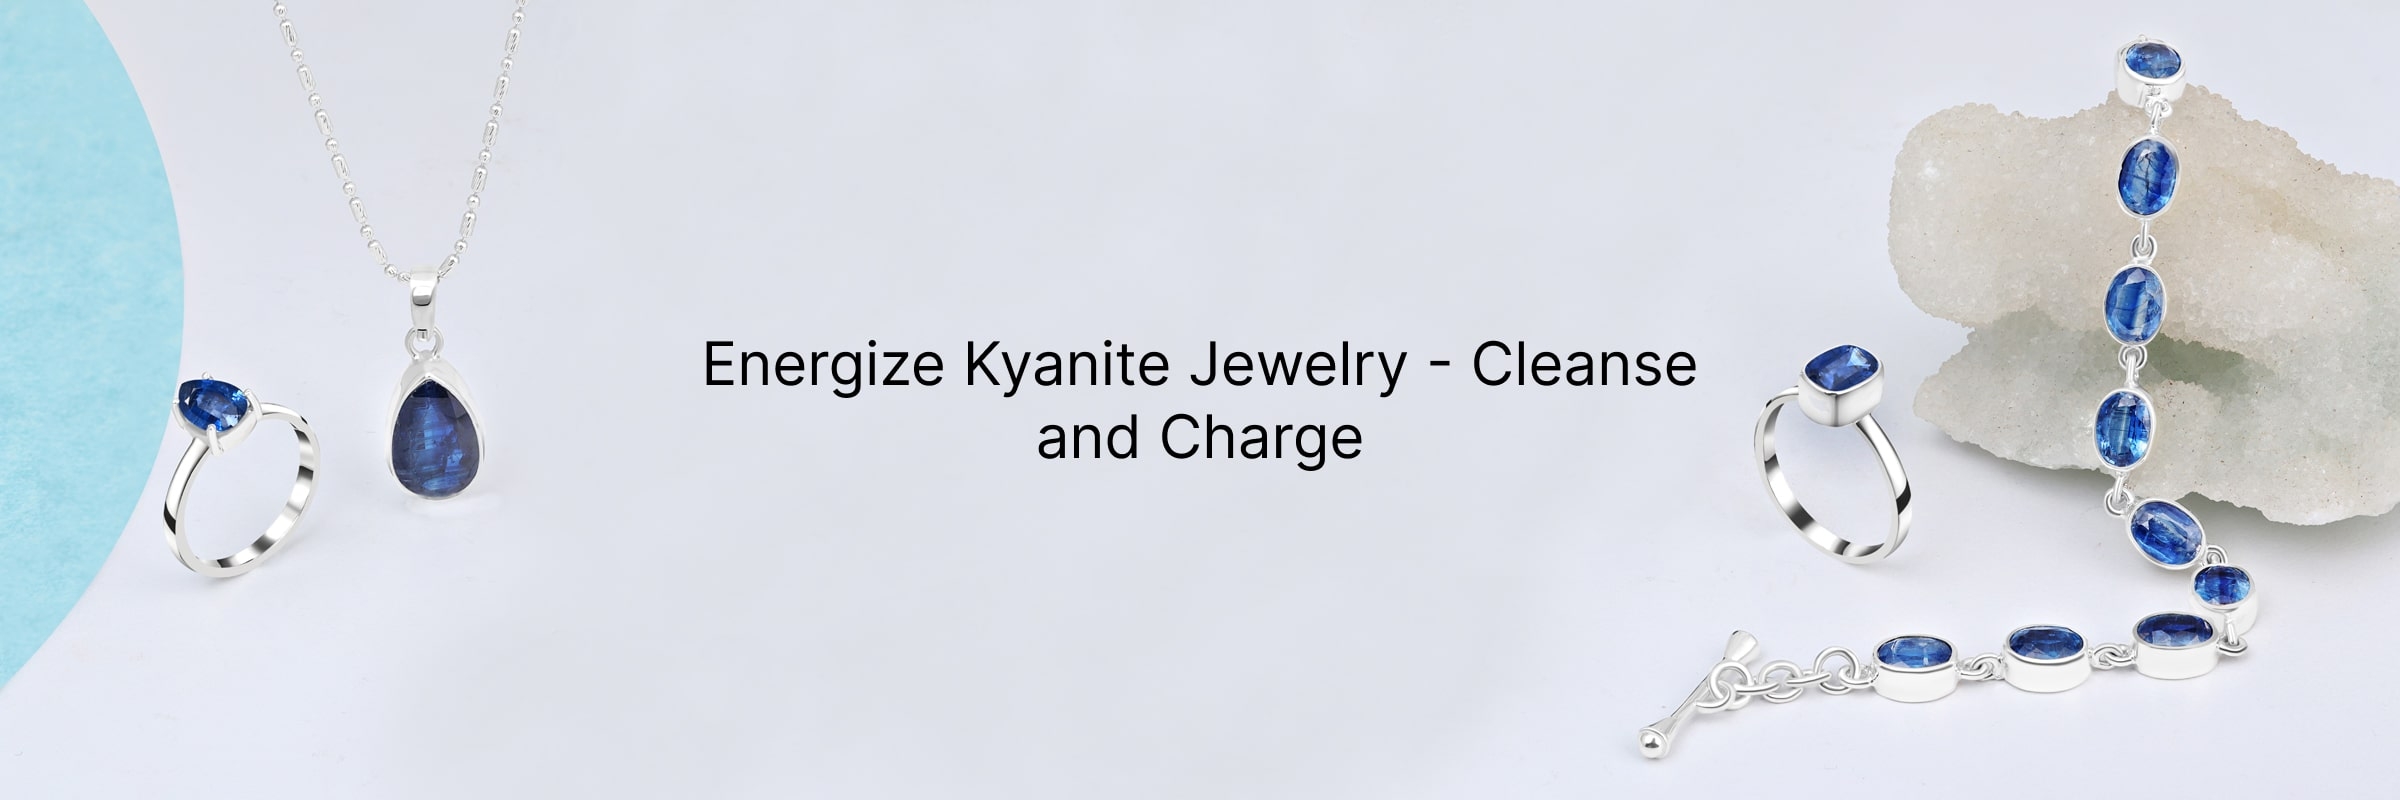 Revitalizing Your Kyanite Jewelry by Cleansing and Charging